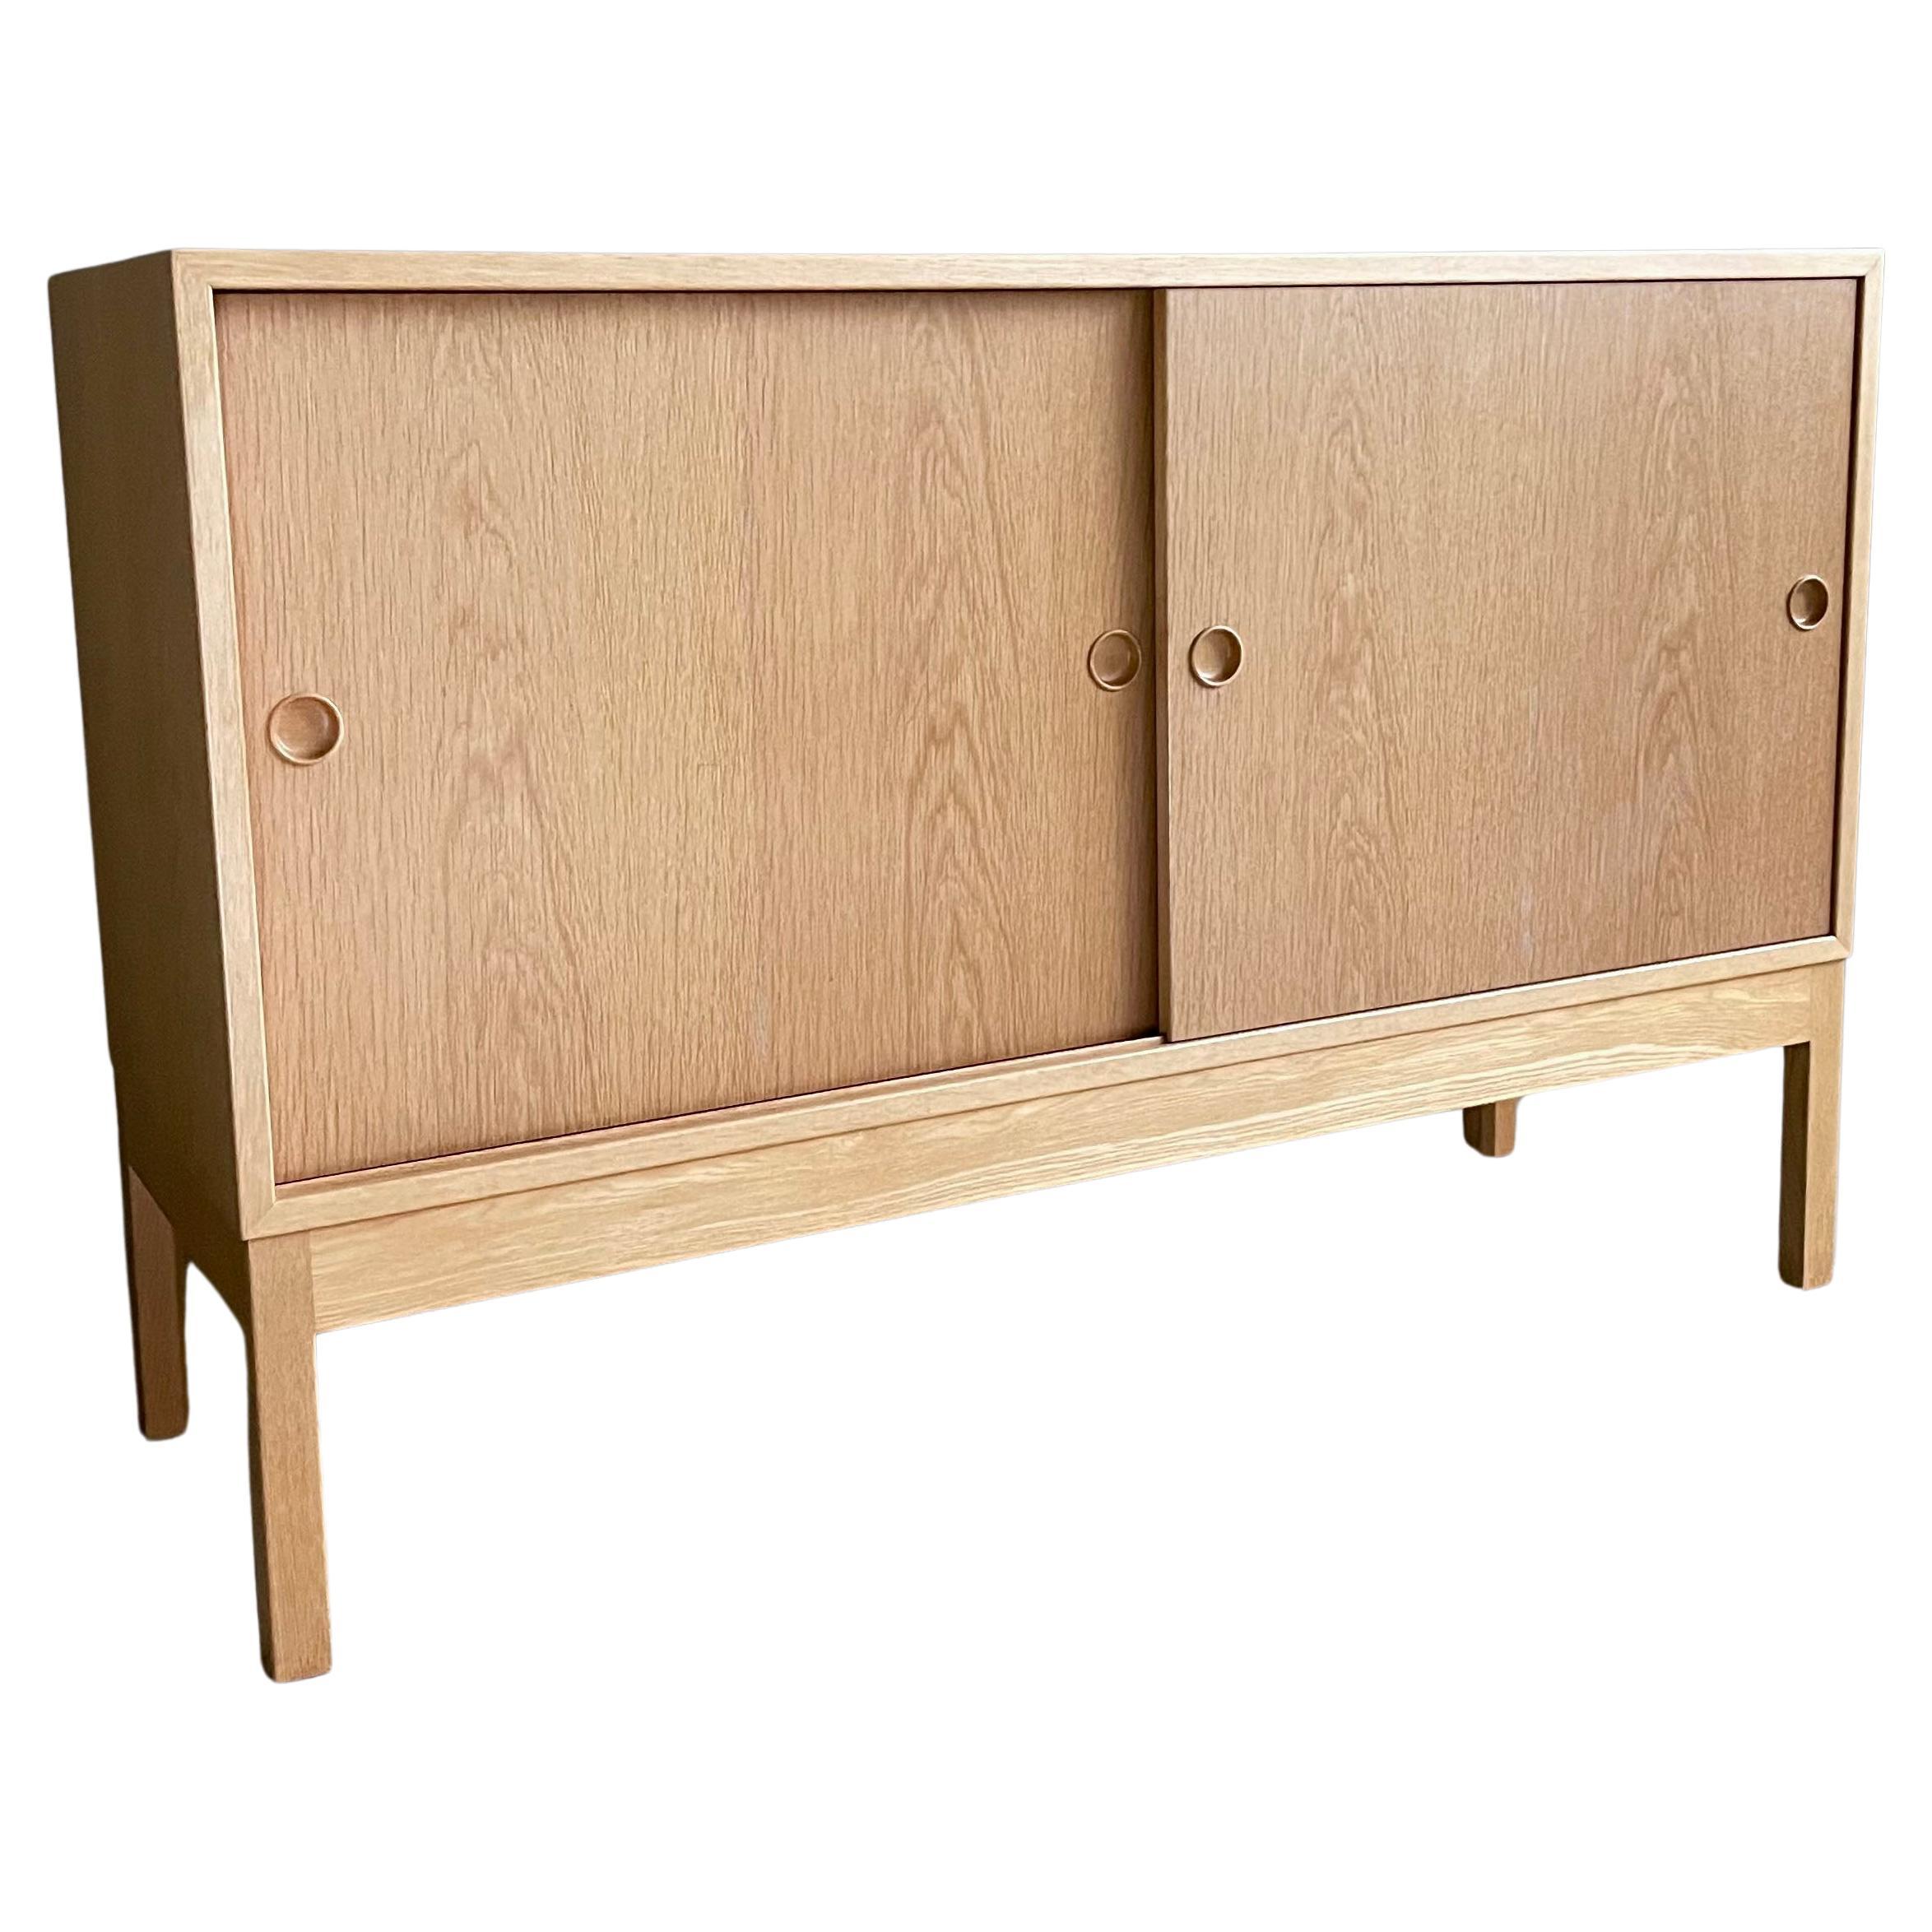 1960’s oak sideboard designed by Børge Mogensen. Produced by Karl Andersen & Søn, Denmark. With inner height adjustable shelves. Nice detailing to handles. In beautiful condition with minimal signs of use.
Designer: Børge Mogensen
Producer: Karl